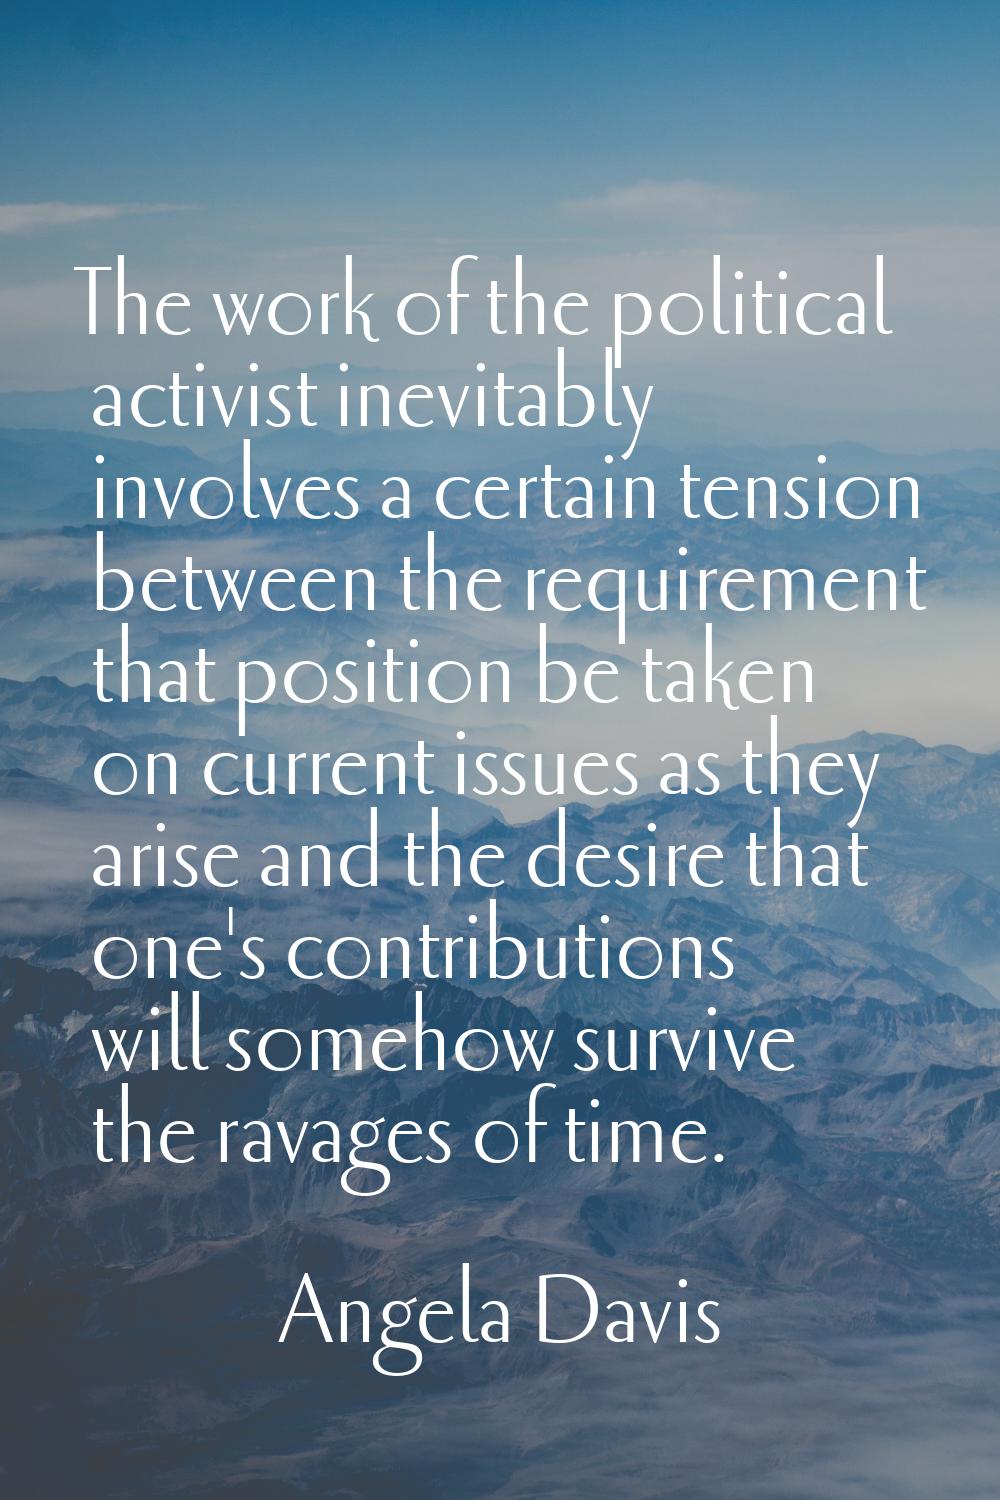 The work of the political activist inevitably involves a certain tension between the requirement th